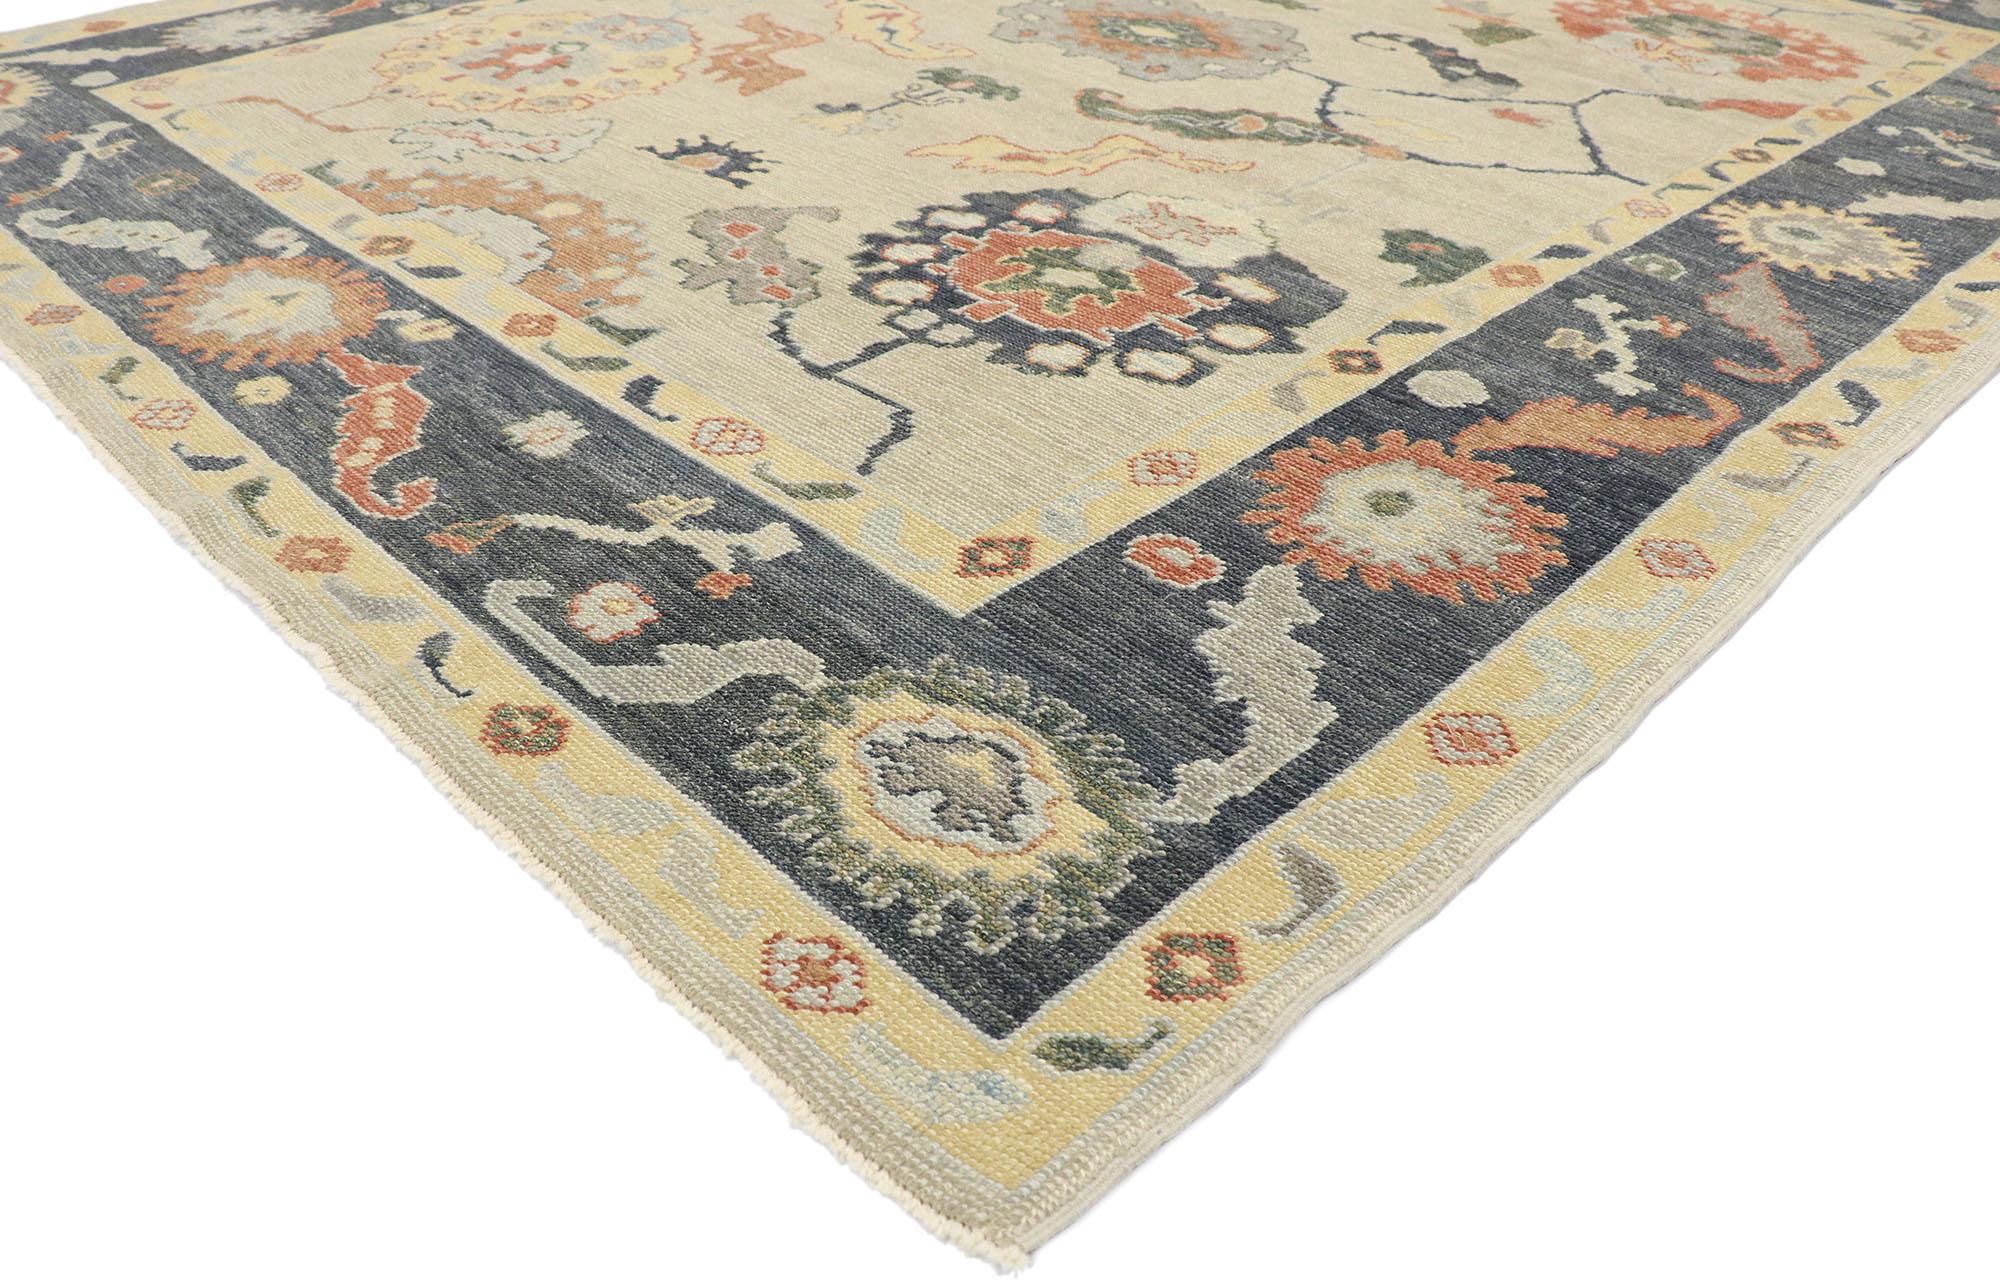 53489, new contemporary Turkish Oushak rug with Modern style. This hand-knotted wool new contemporary Oushak-style rug features an all-over floral pattern spread across an abrashed sandy beige field. An array of botanical motifs decorates the field